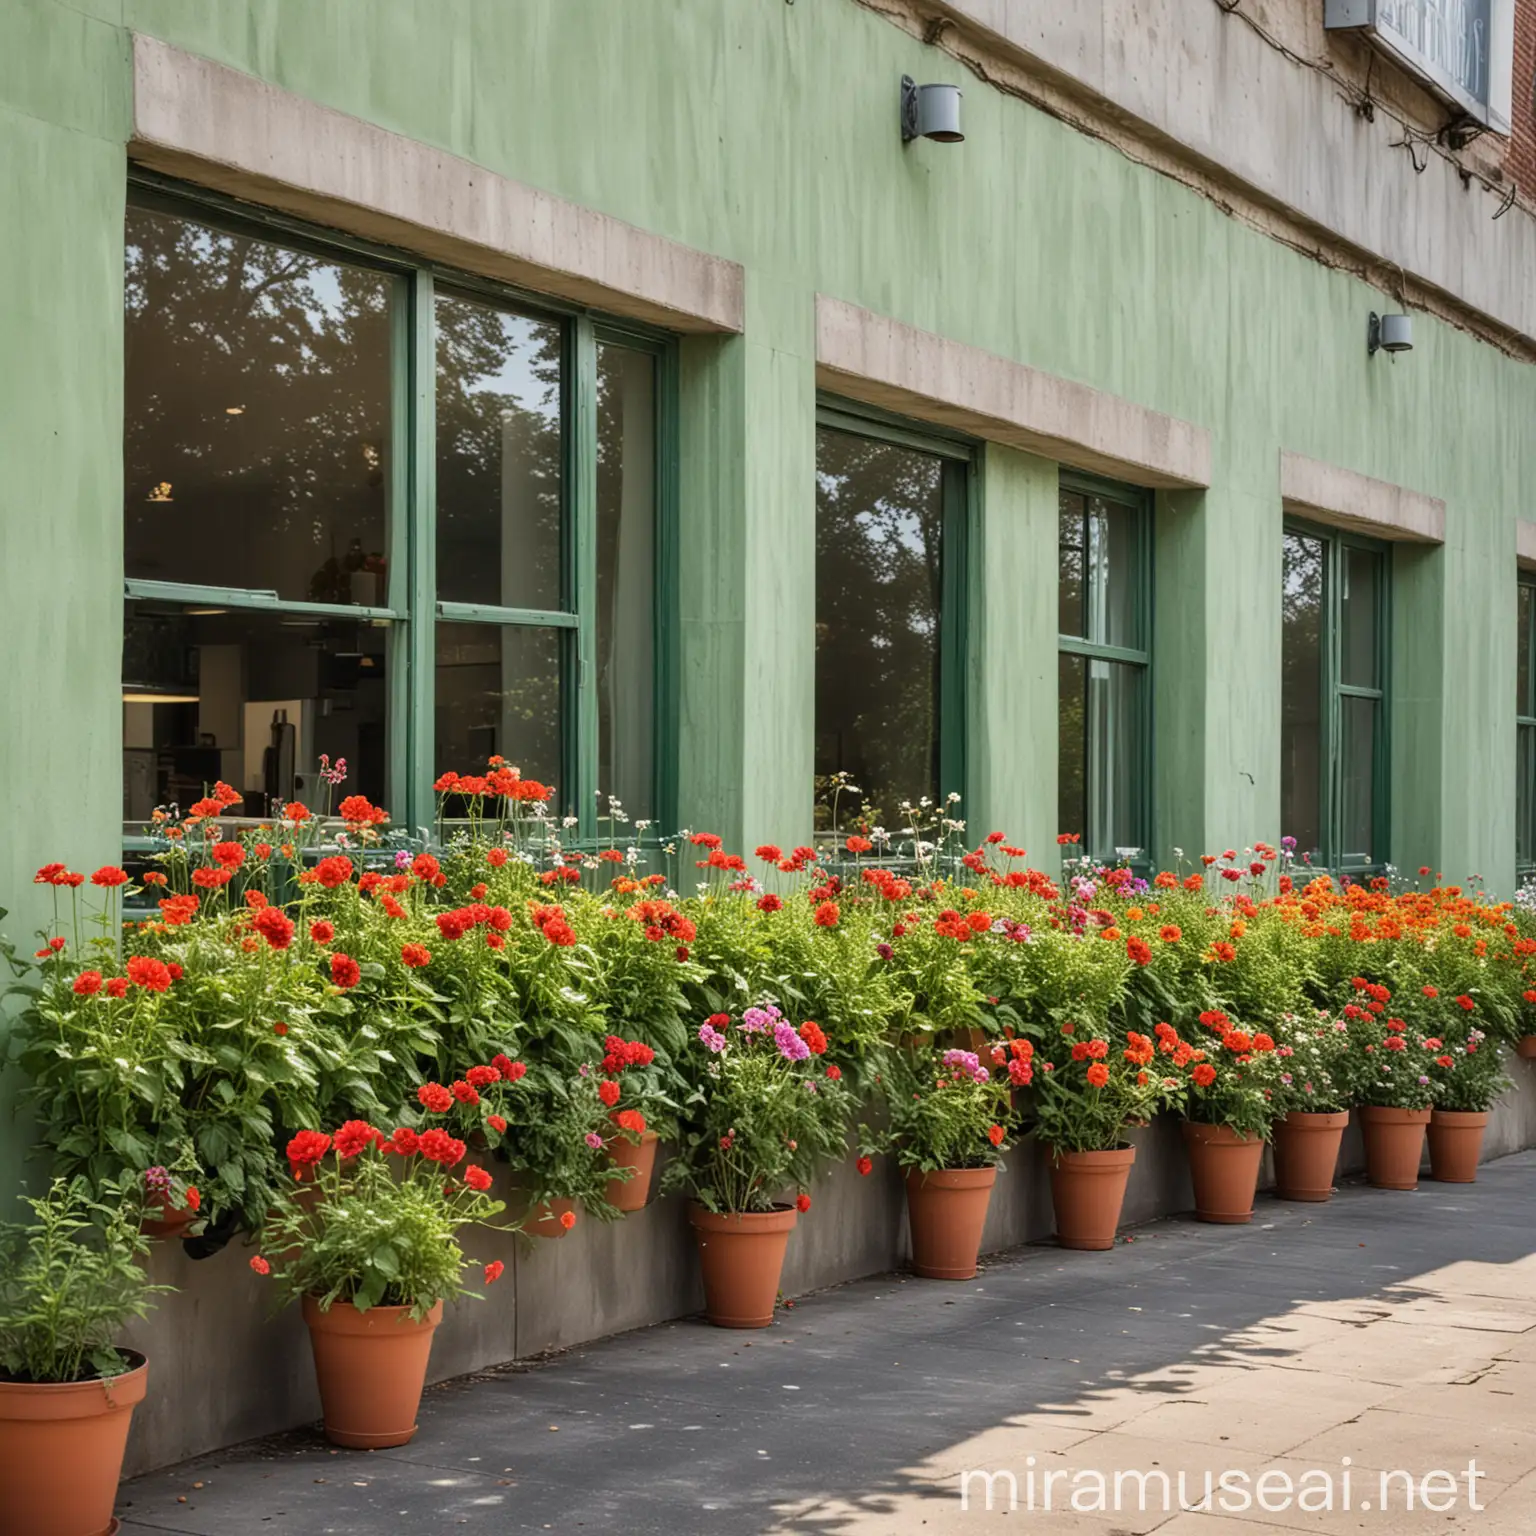 Cafeteria Wall with Lush Greenery and Flower Pots